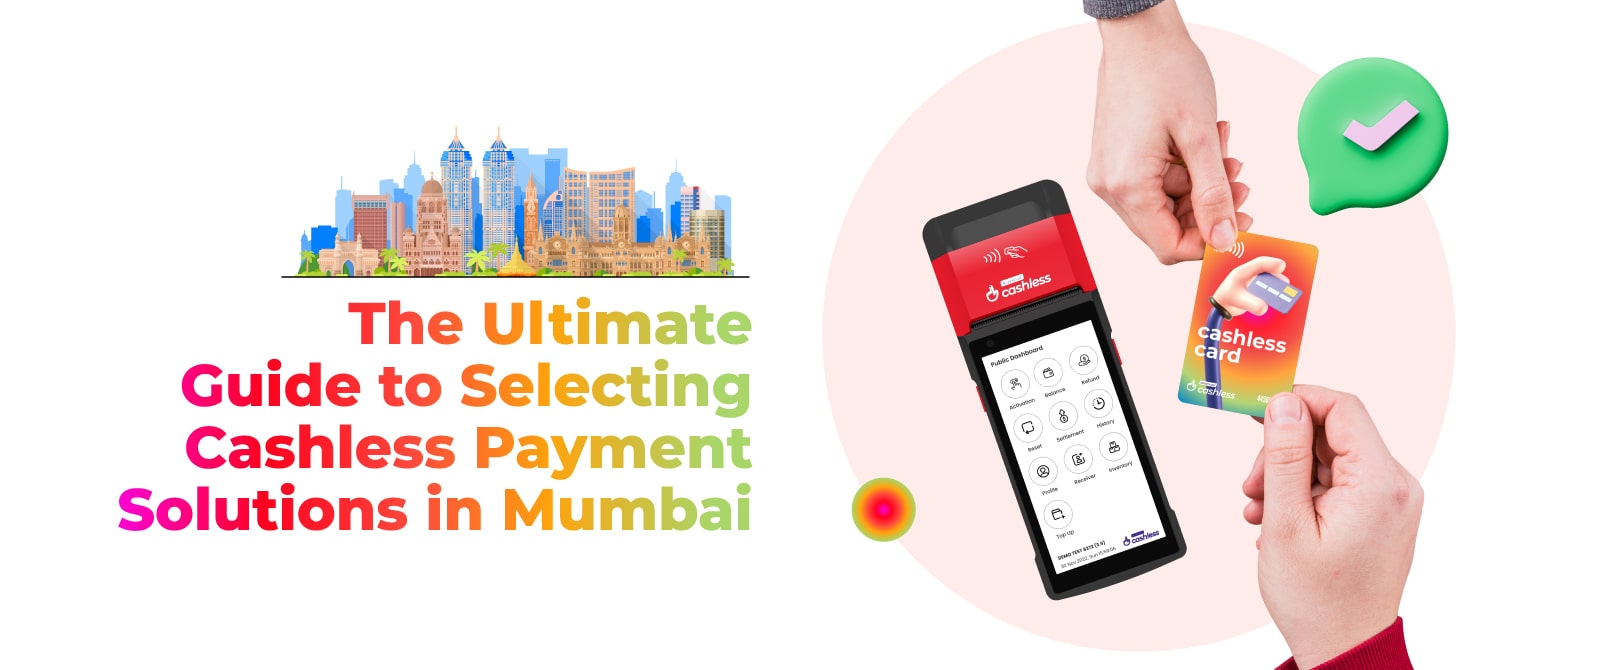 The Ultimate Guide to Selecting Cashless Payment Solutions in Mumbai